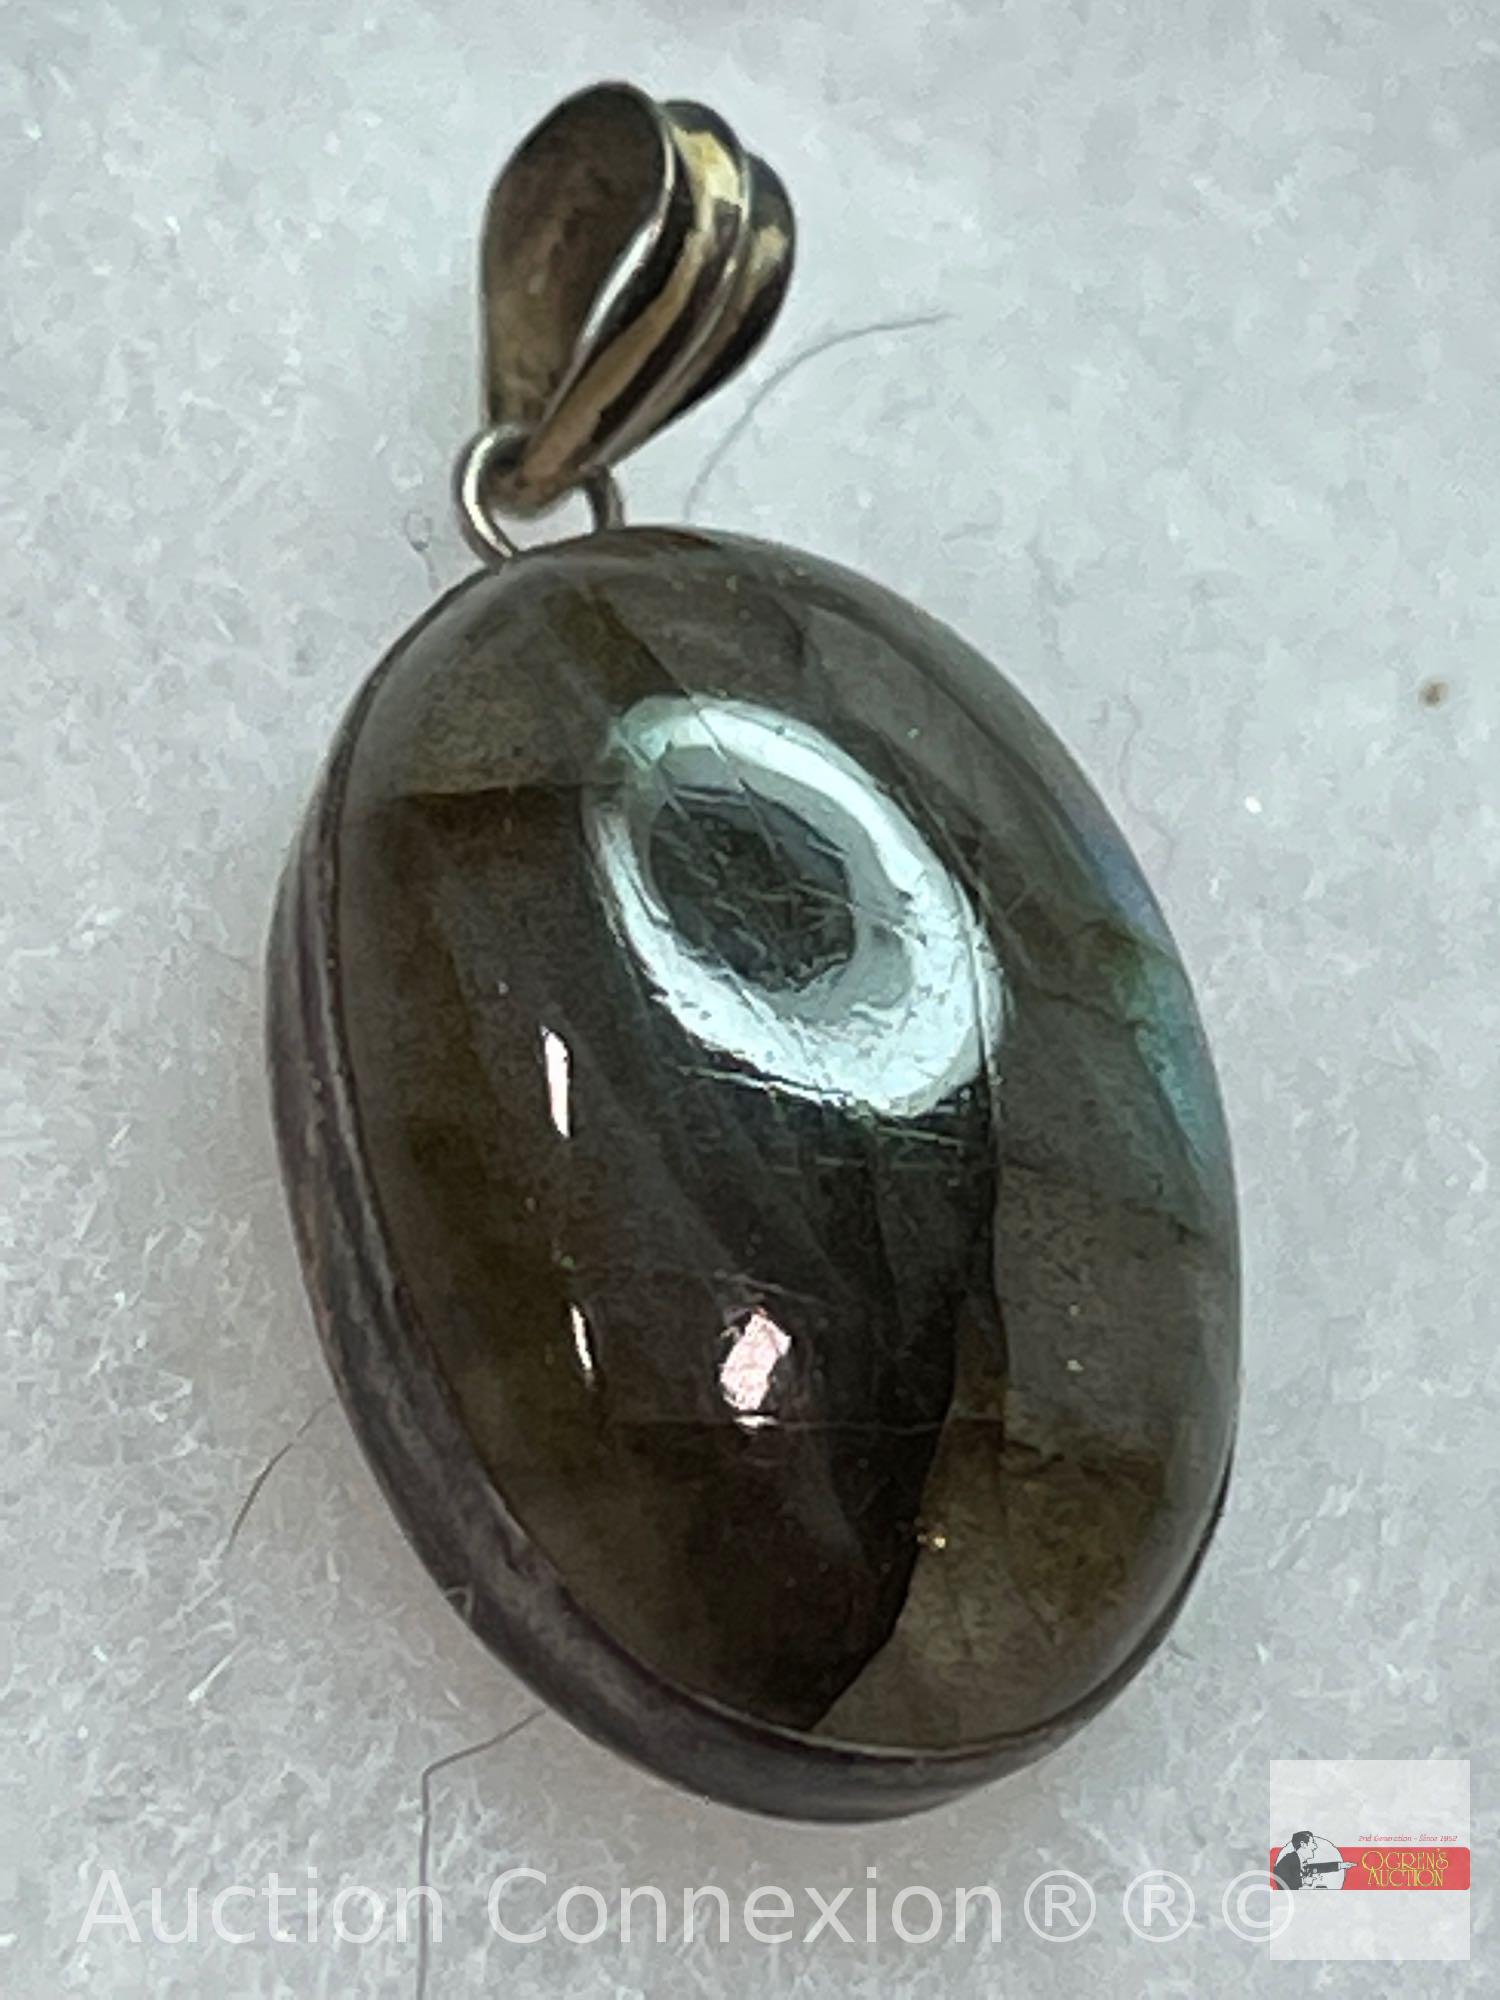 Jewelry - Pendant, Sterling silver bezel with mossy green cabochon